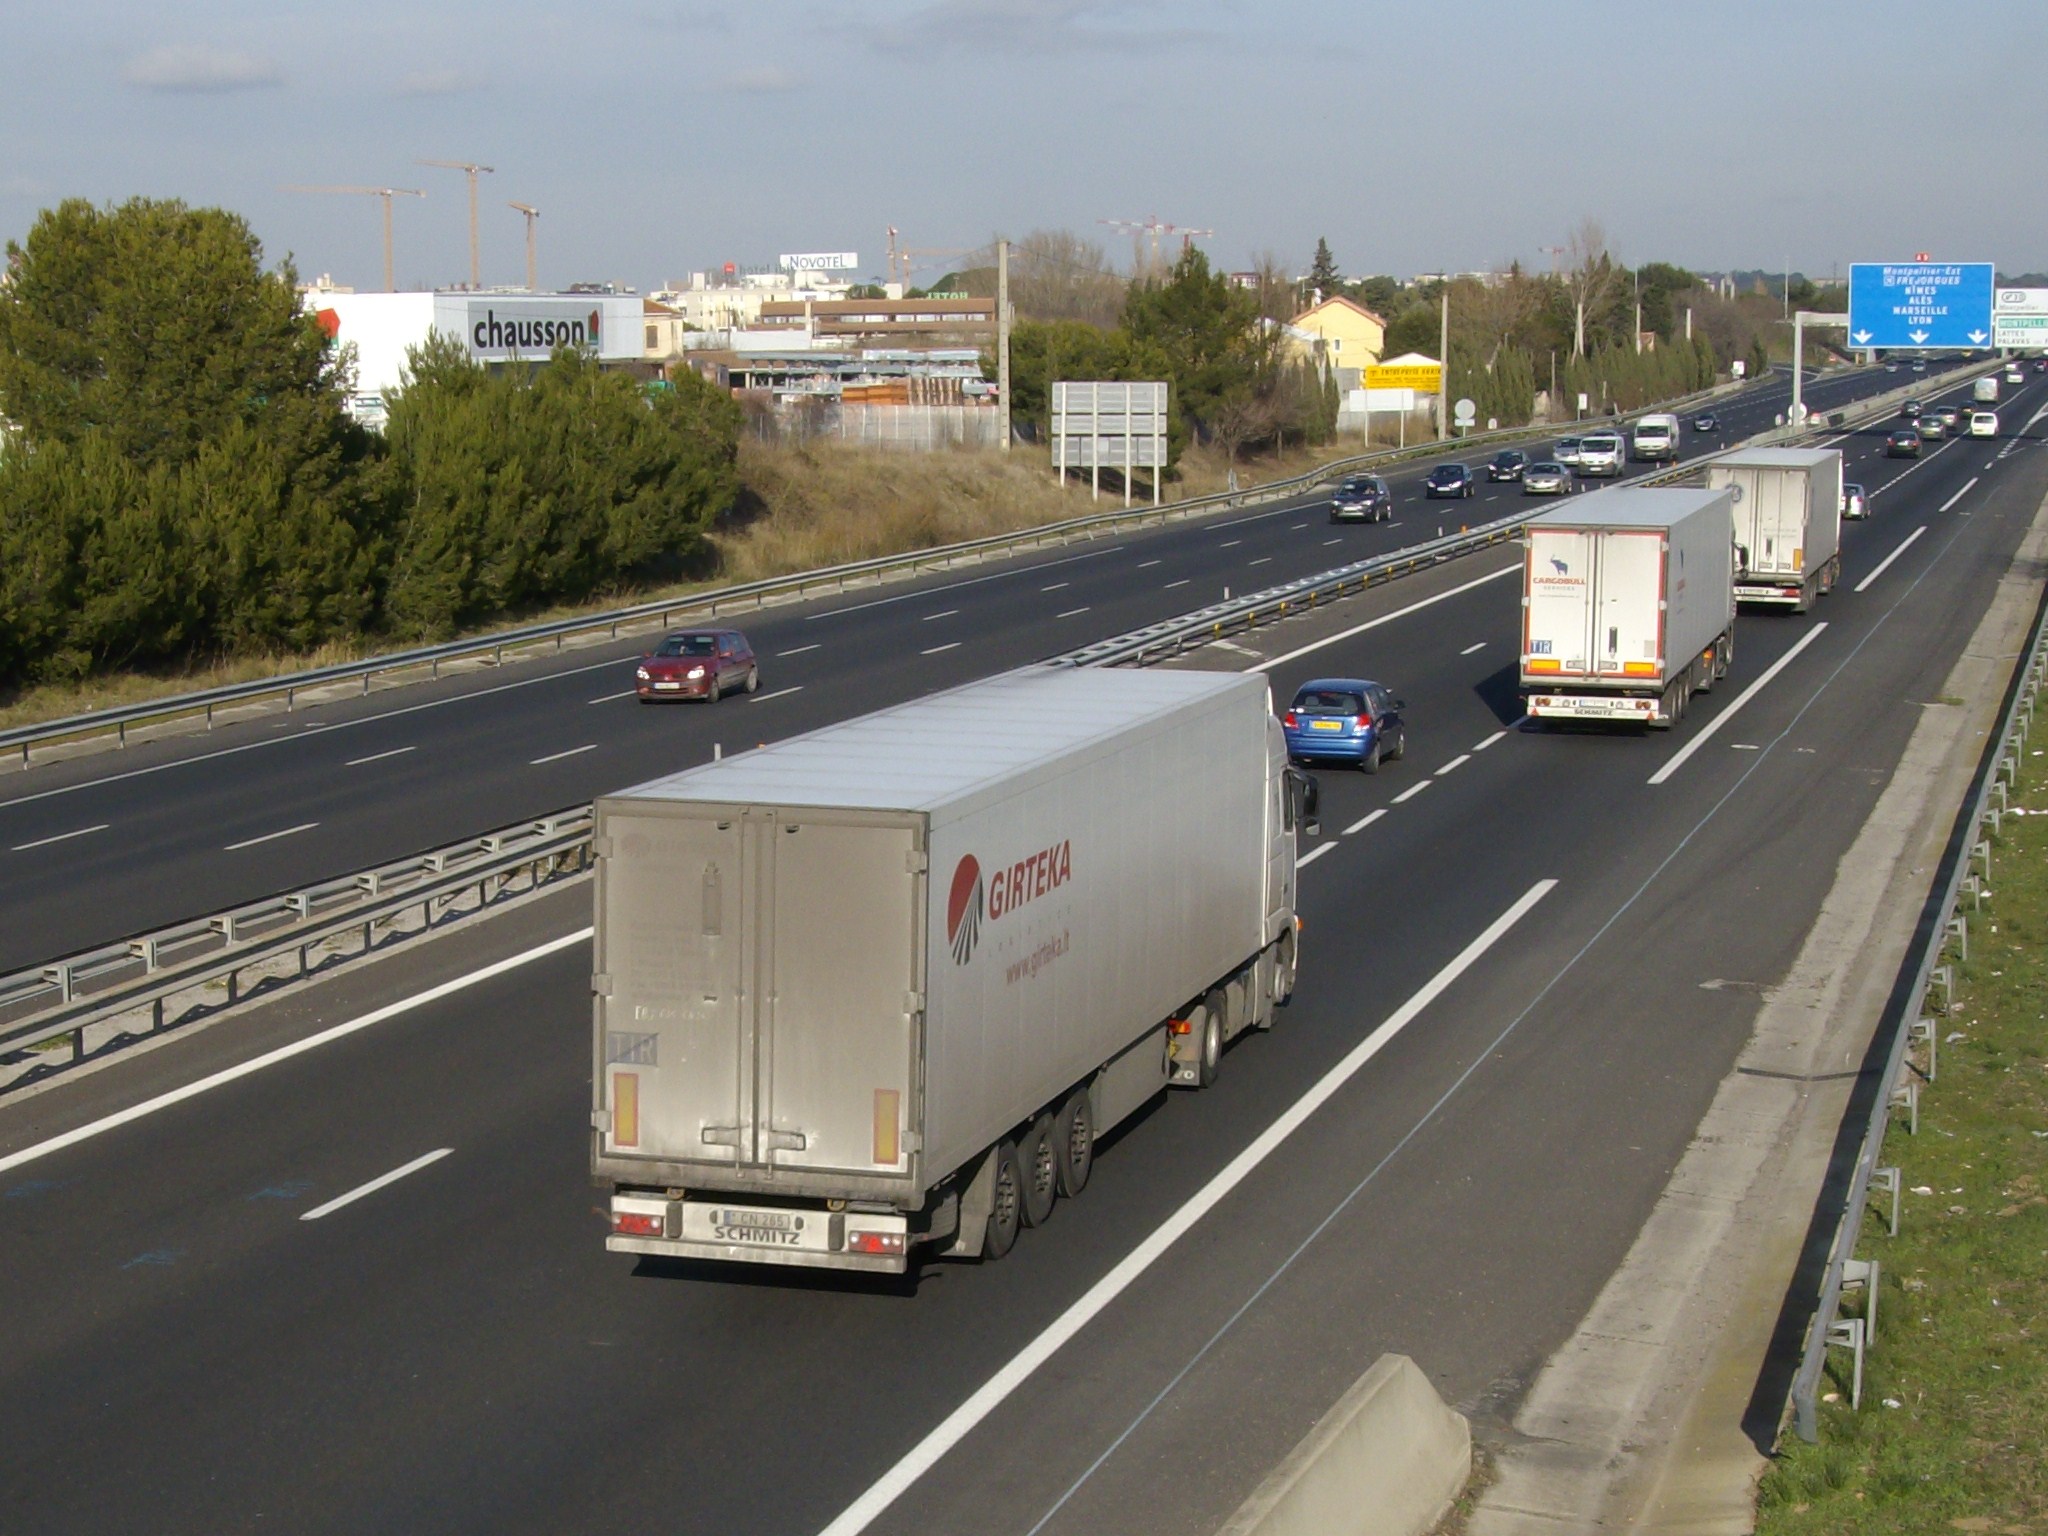 three trucks on road with other traffic in distance